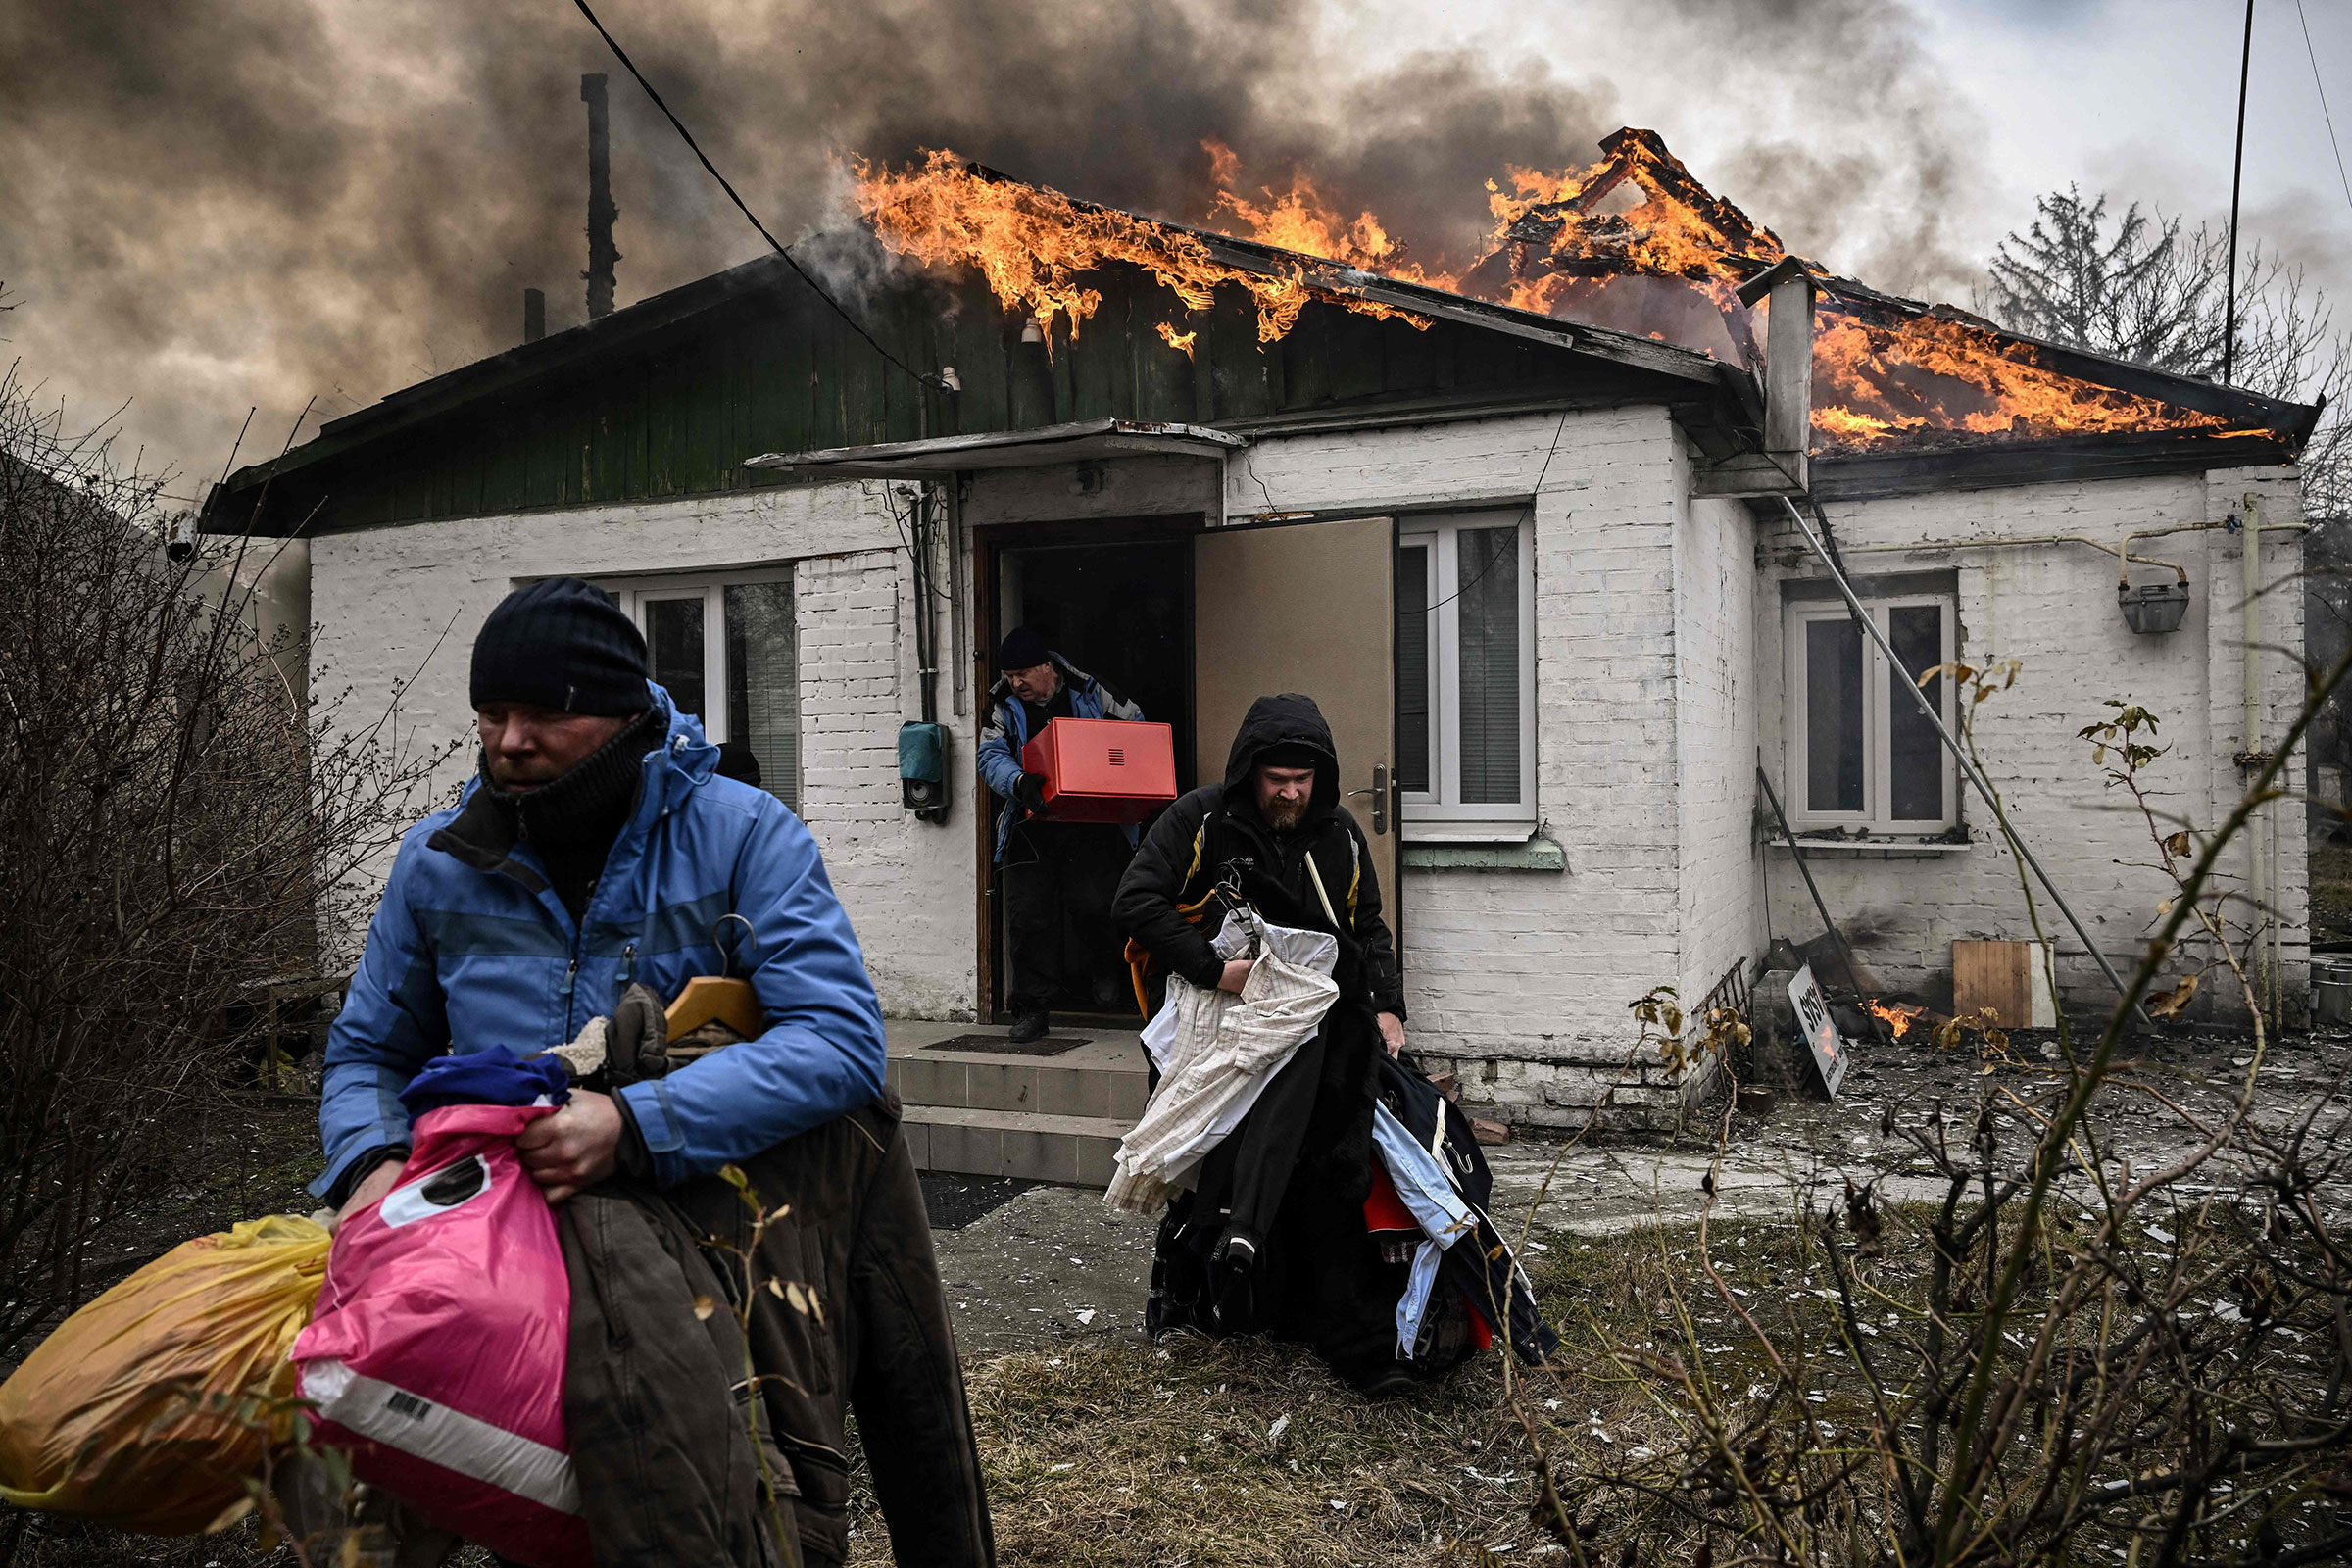 People remove personal belongings from a burning house after being shelled in the city of Irpin on March 4.